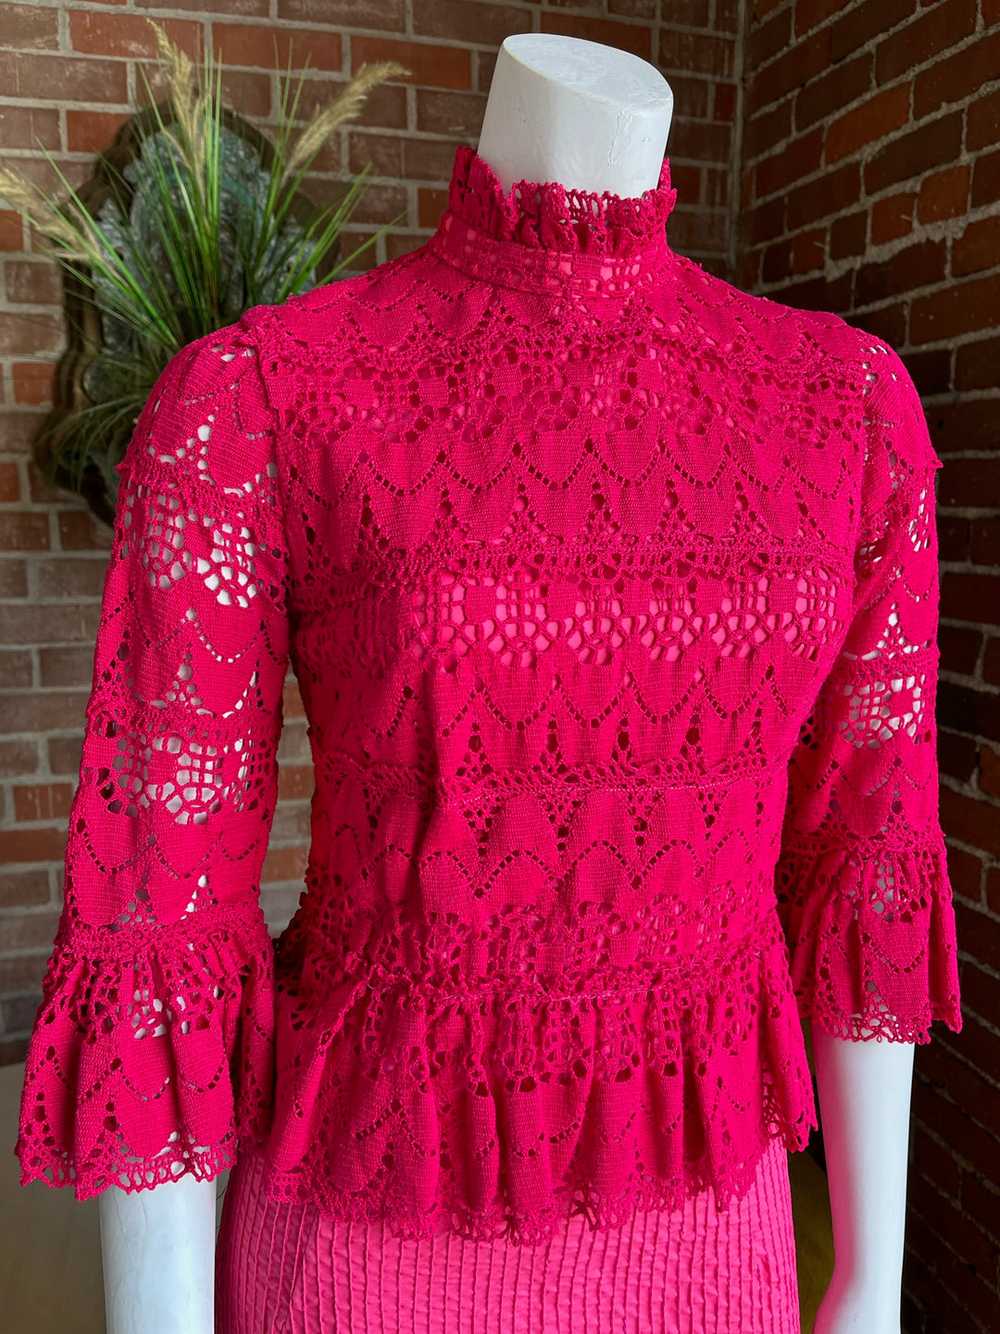 1960s Hot Pink Lace Mexican Dress - image 6